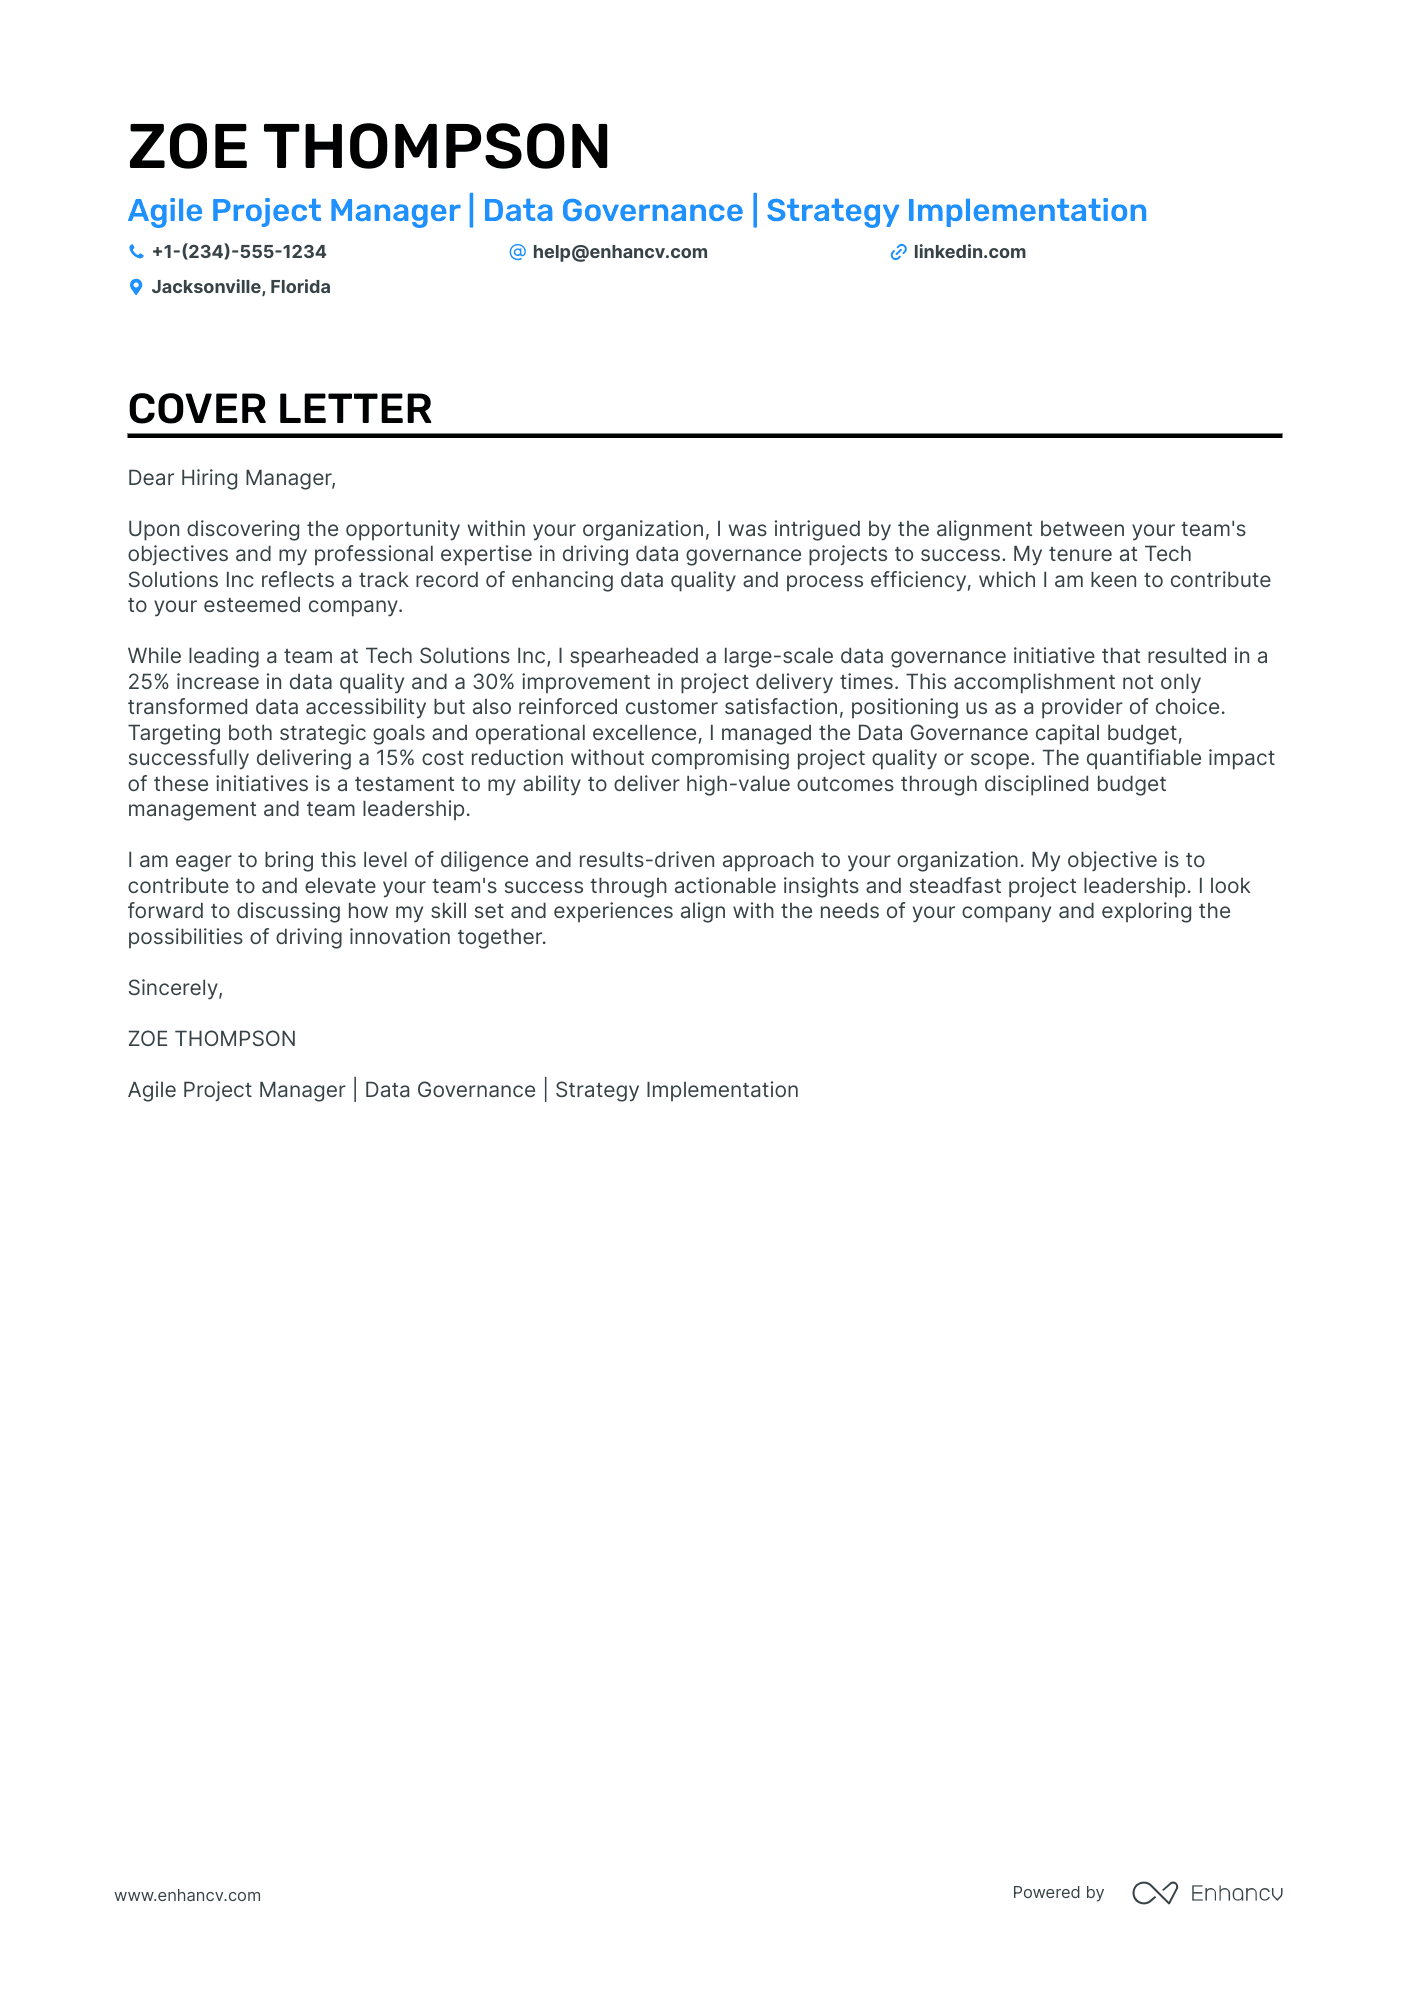 Agile Project Manager cover letter